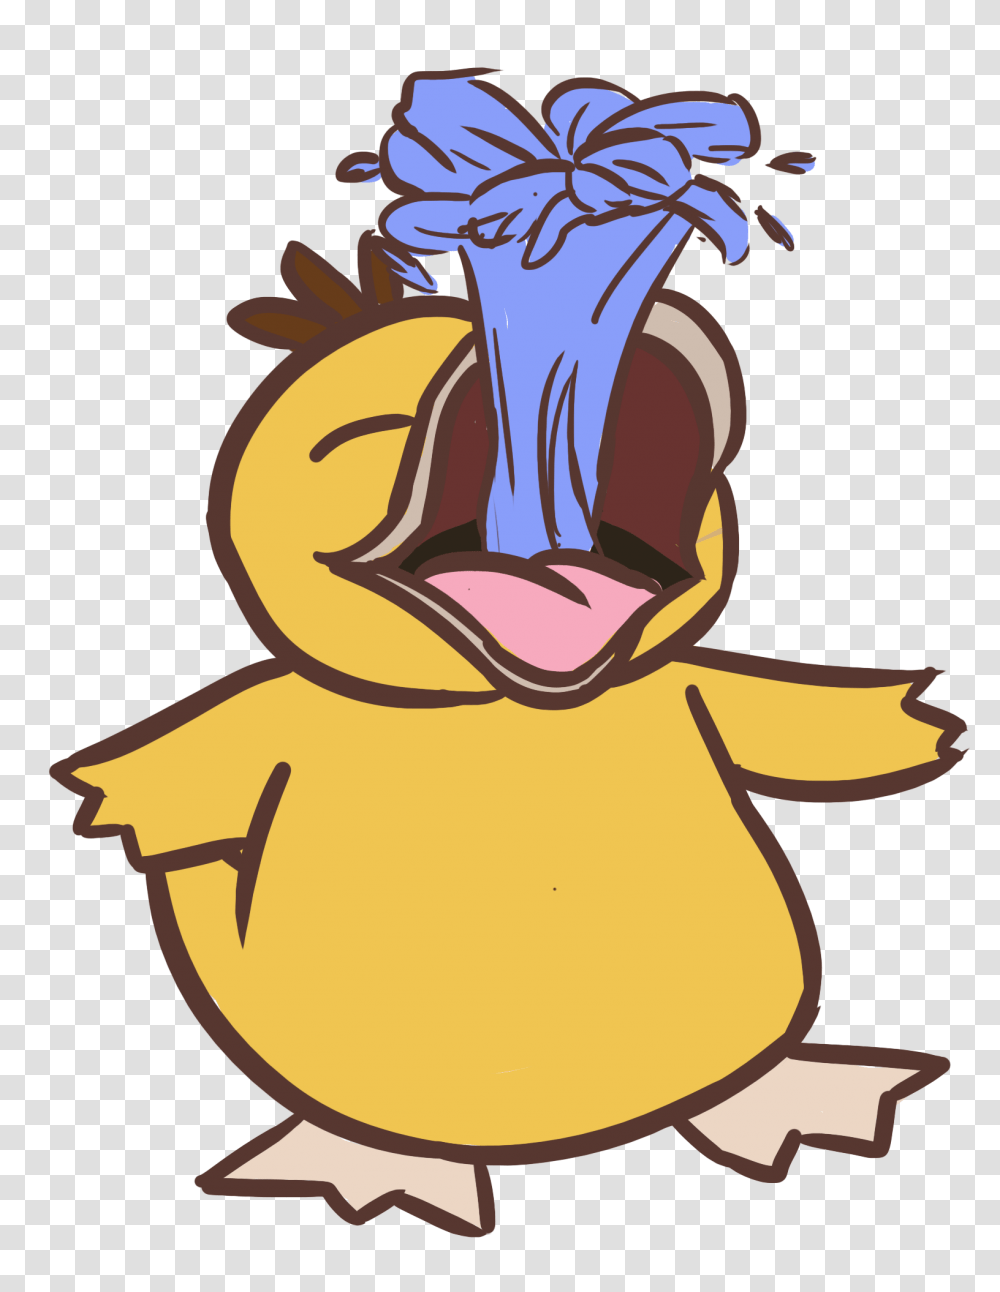 Psyduck Used Confusion And Water Gun, Animal, Plant, Bird, Food Transparent Png